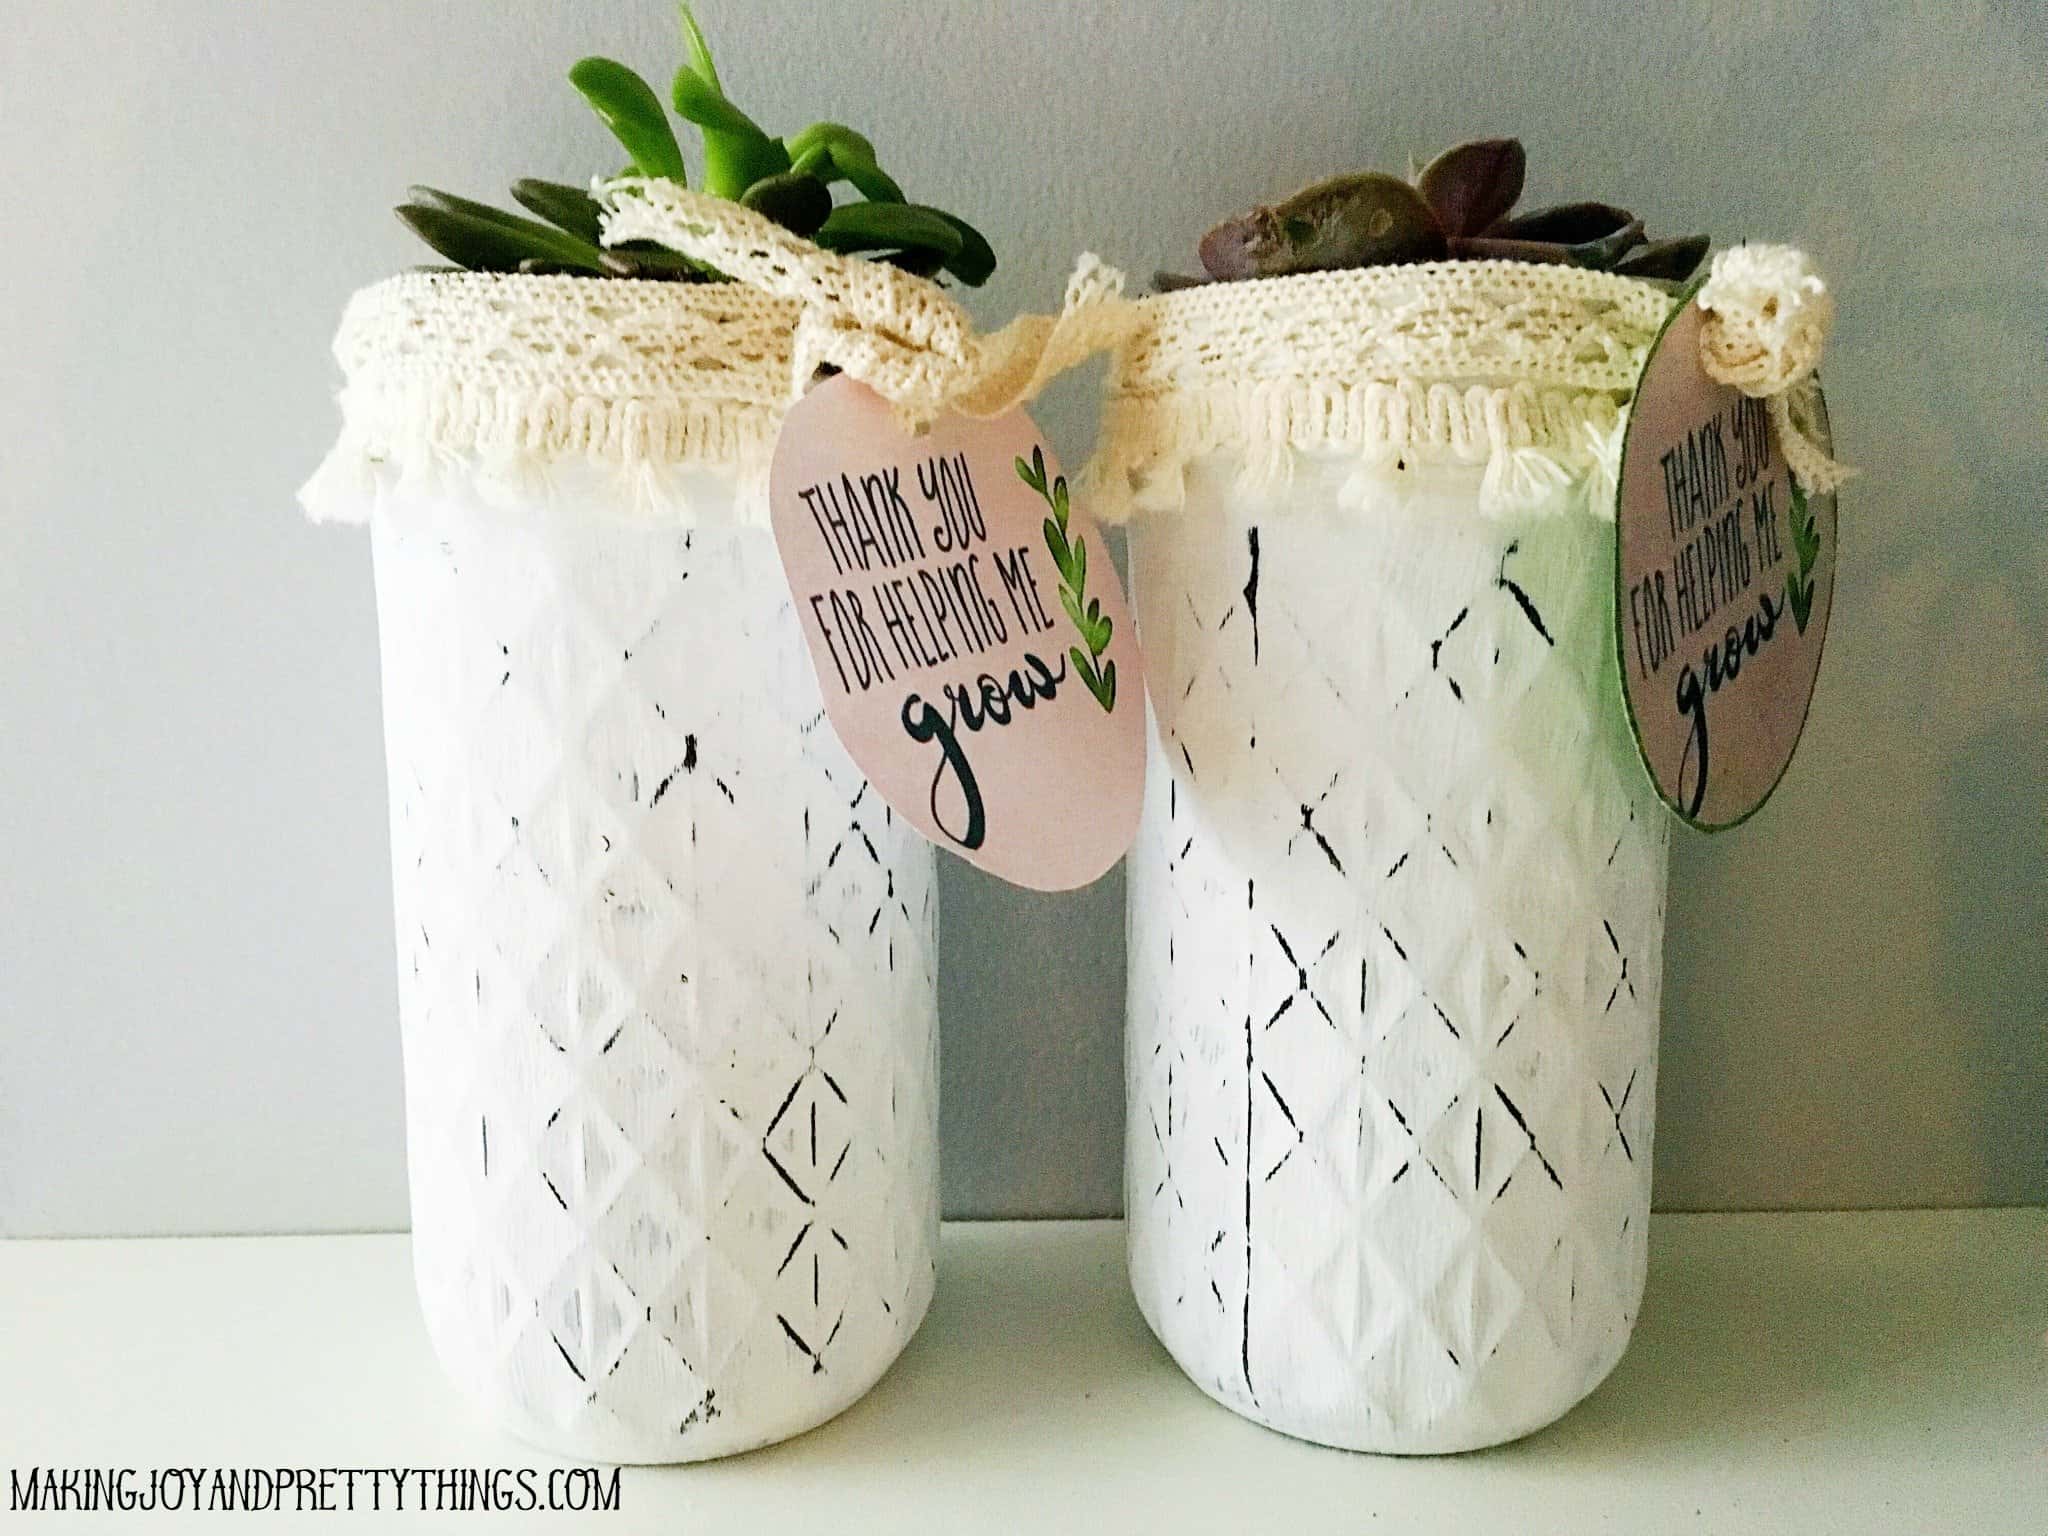 I hope you were inspired by these mason jars distressed and made into teacher appreciation gifts